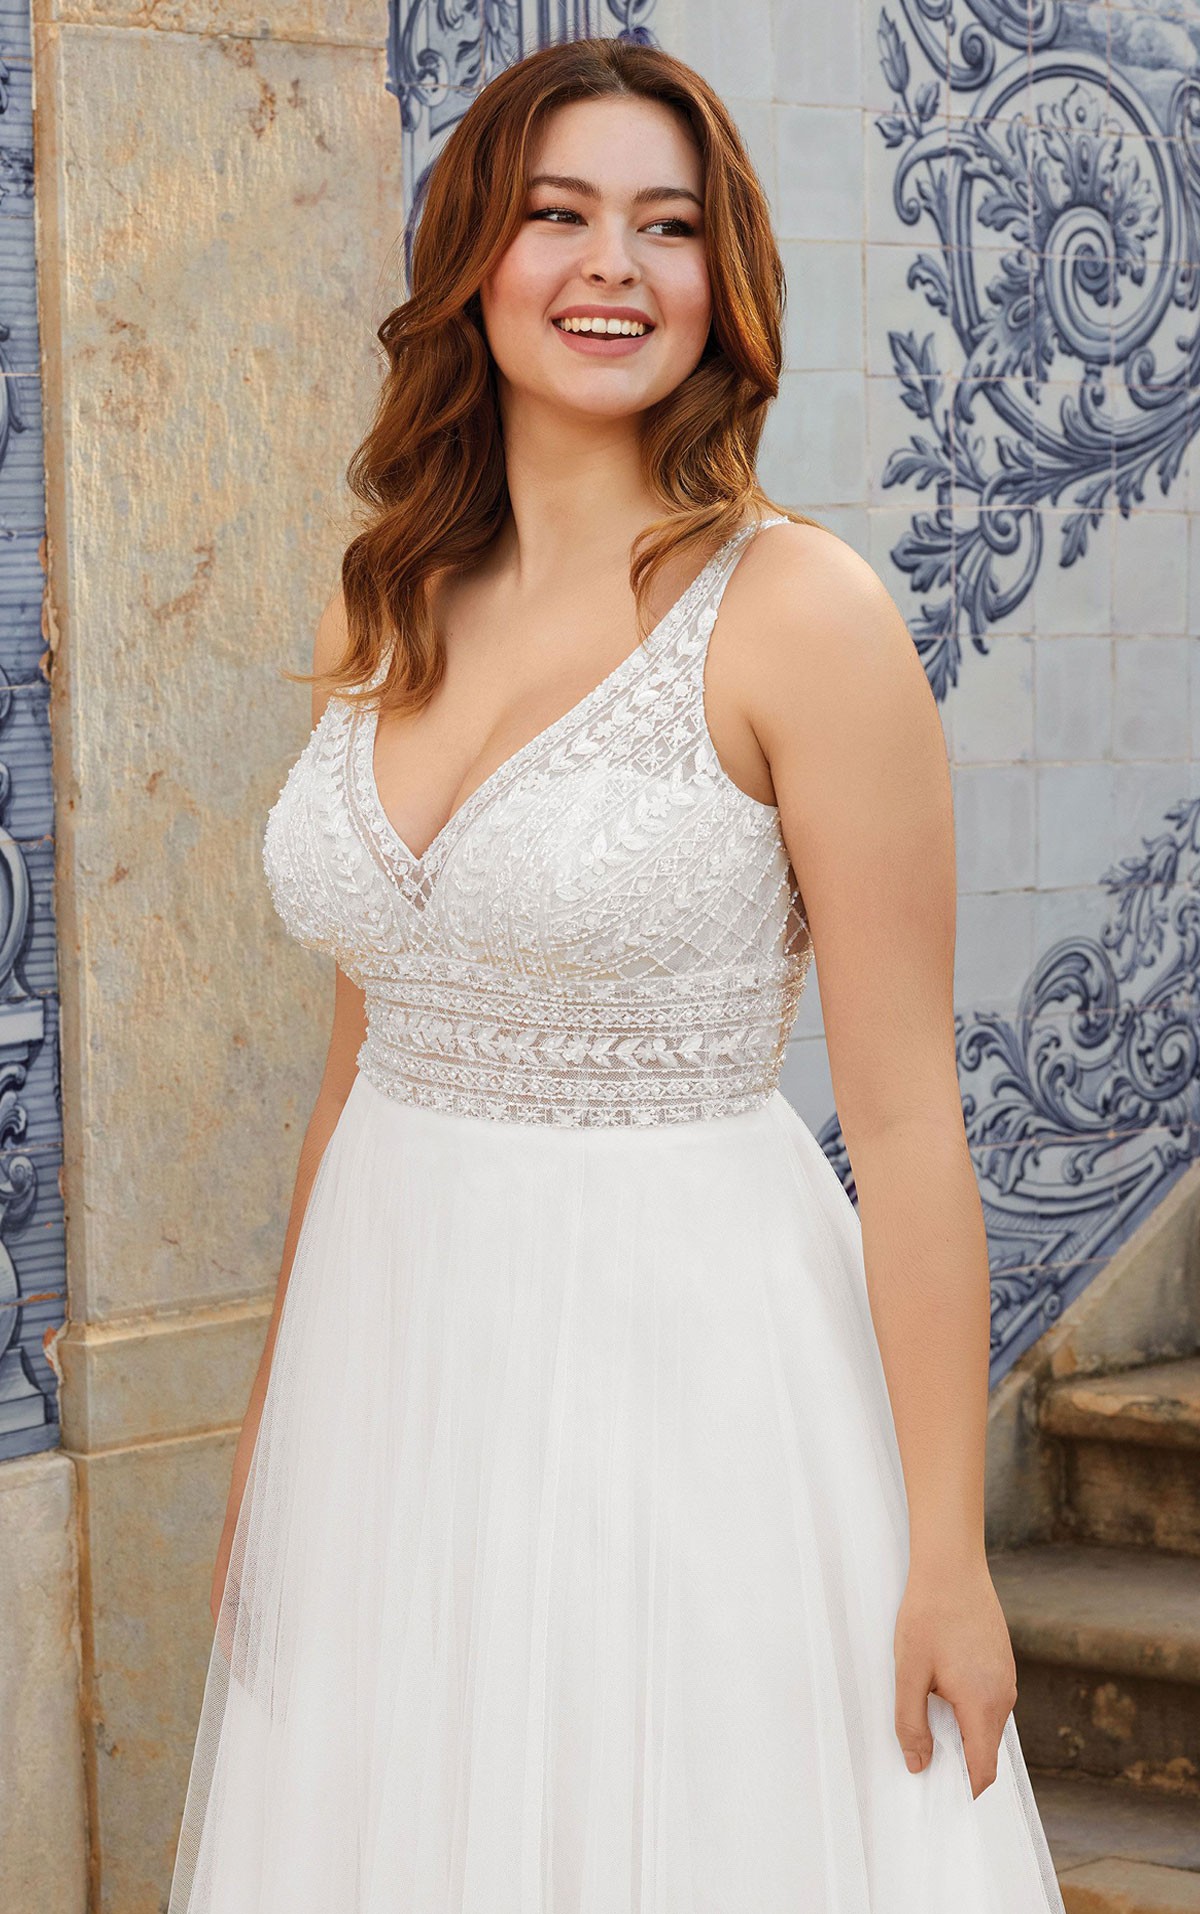 44120 - Freya Size 8, 12, 20 - Sincerity Bridal by Justin Alexander - 44120 Intricate beaded V neck bodice with straps & French tulle Aline skirt. Part of the Plus size wedding dress collection at Blessings Bridal shop Brighton - 3 Loyal Parade, Mill Rise, Westdene, Brighton. E. Sussex ~BN1 5GG T: 01273 505766 E: info@blessingsbridal.co.uk